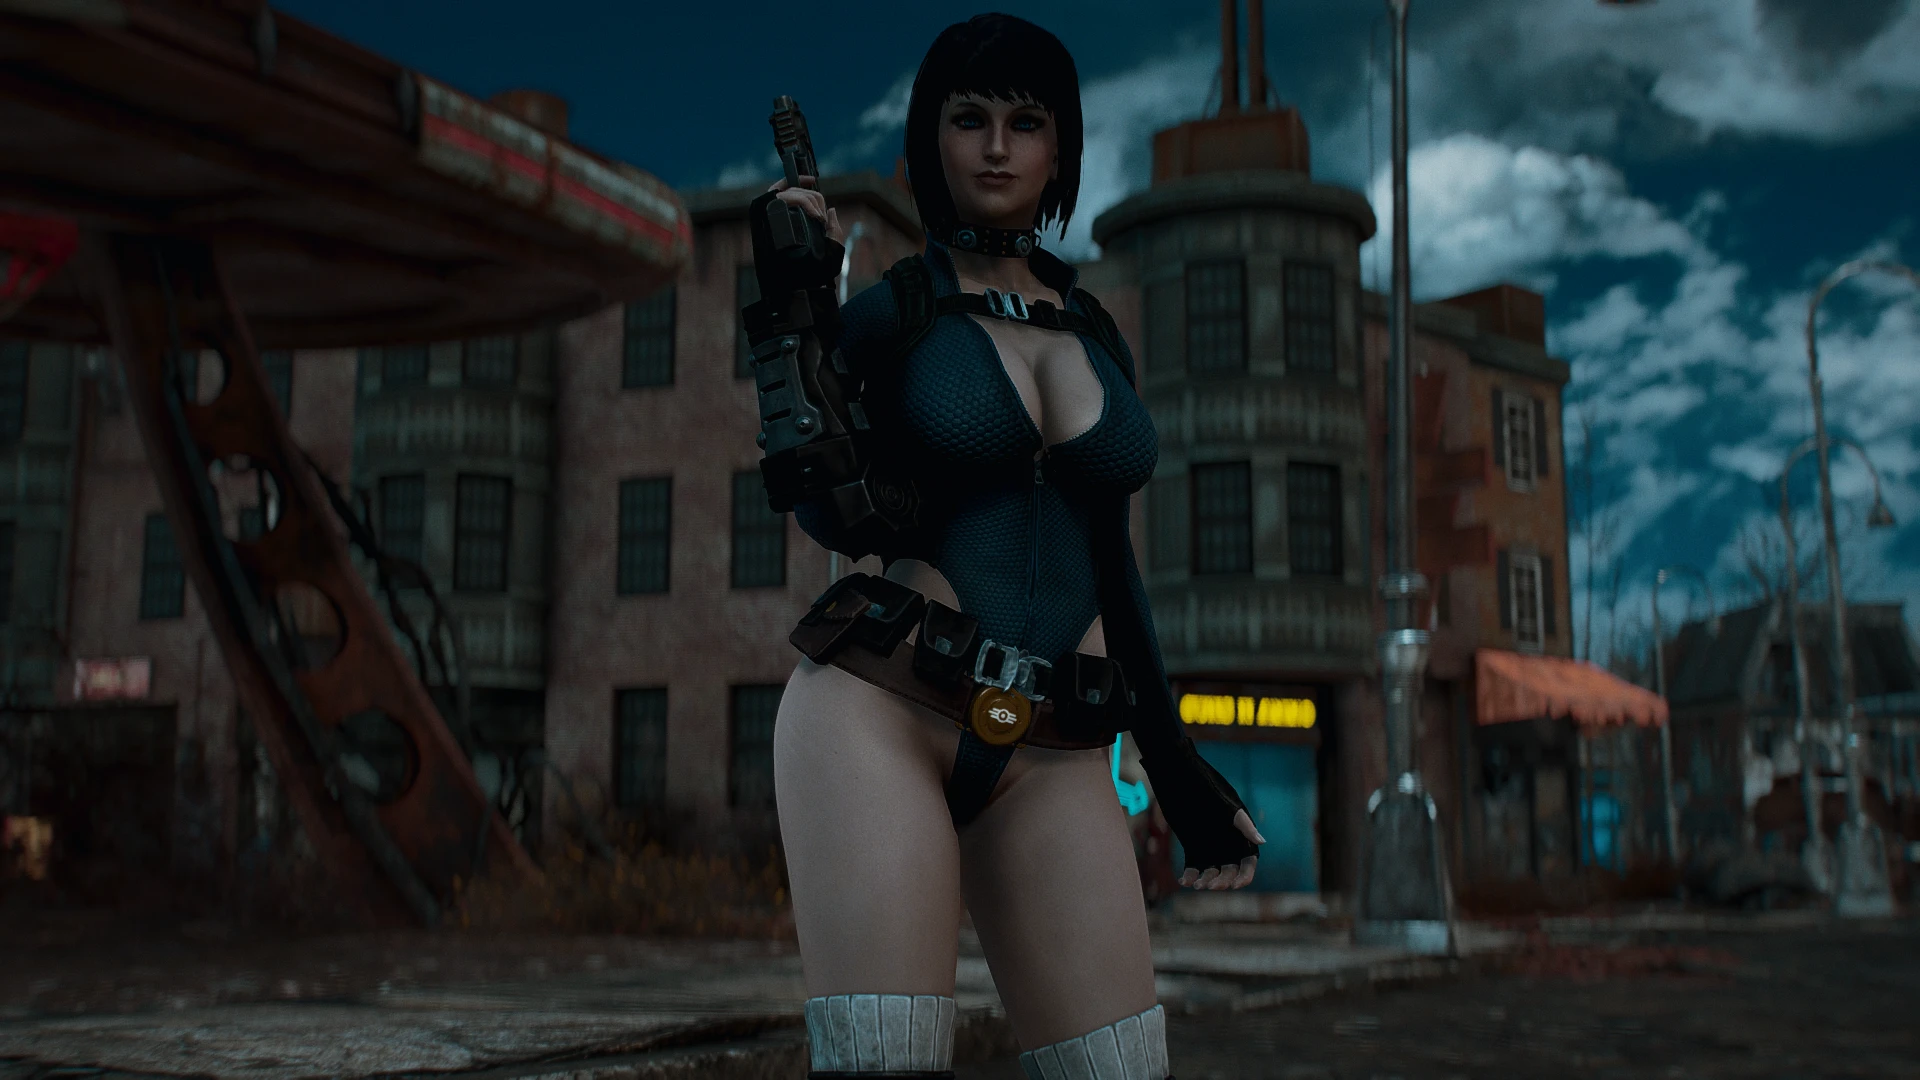 Vault Meat streetfighter outfit at Fallout 4 Nexus Mods and. 